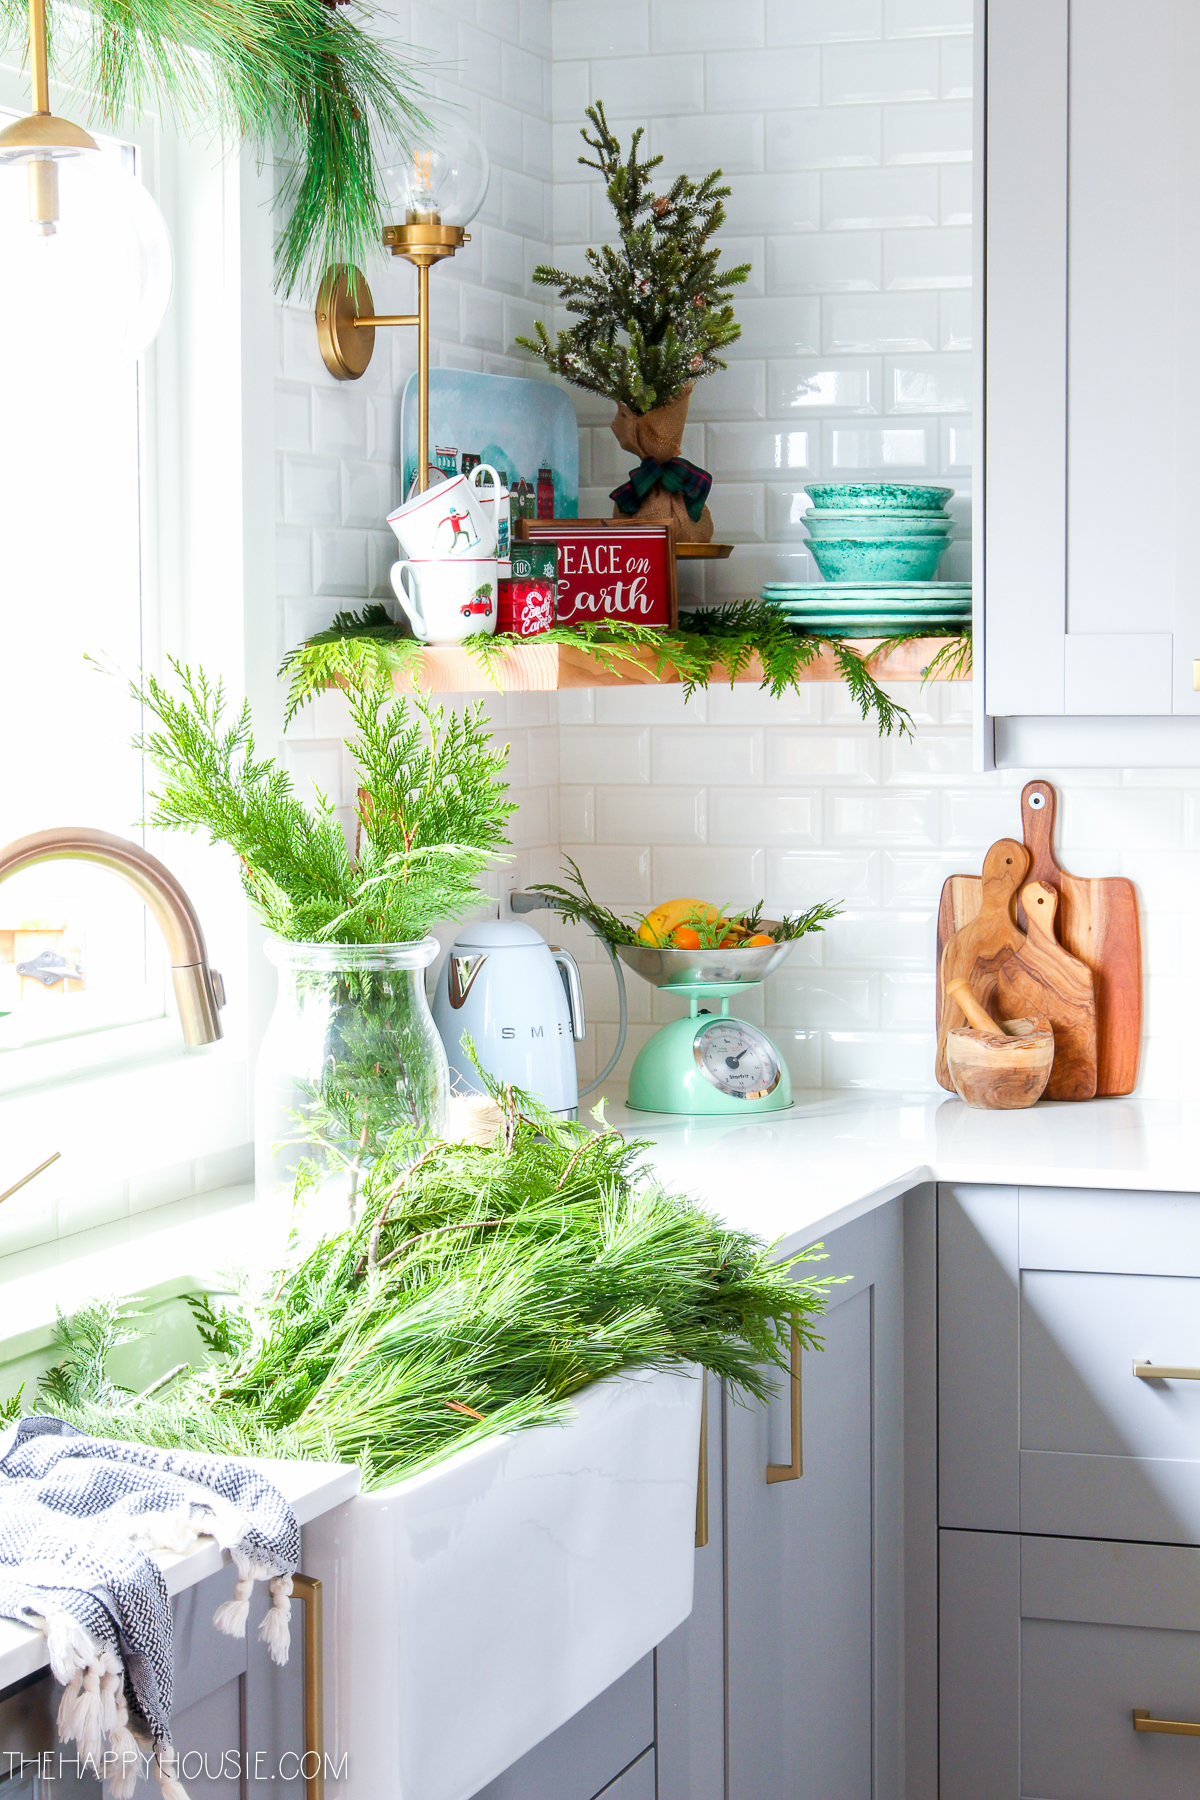 Cedar boughs are in the sink in the kitchen.